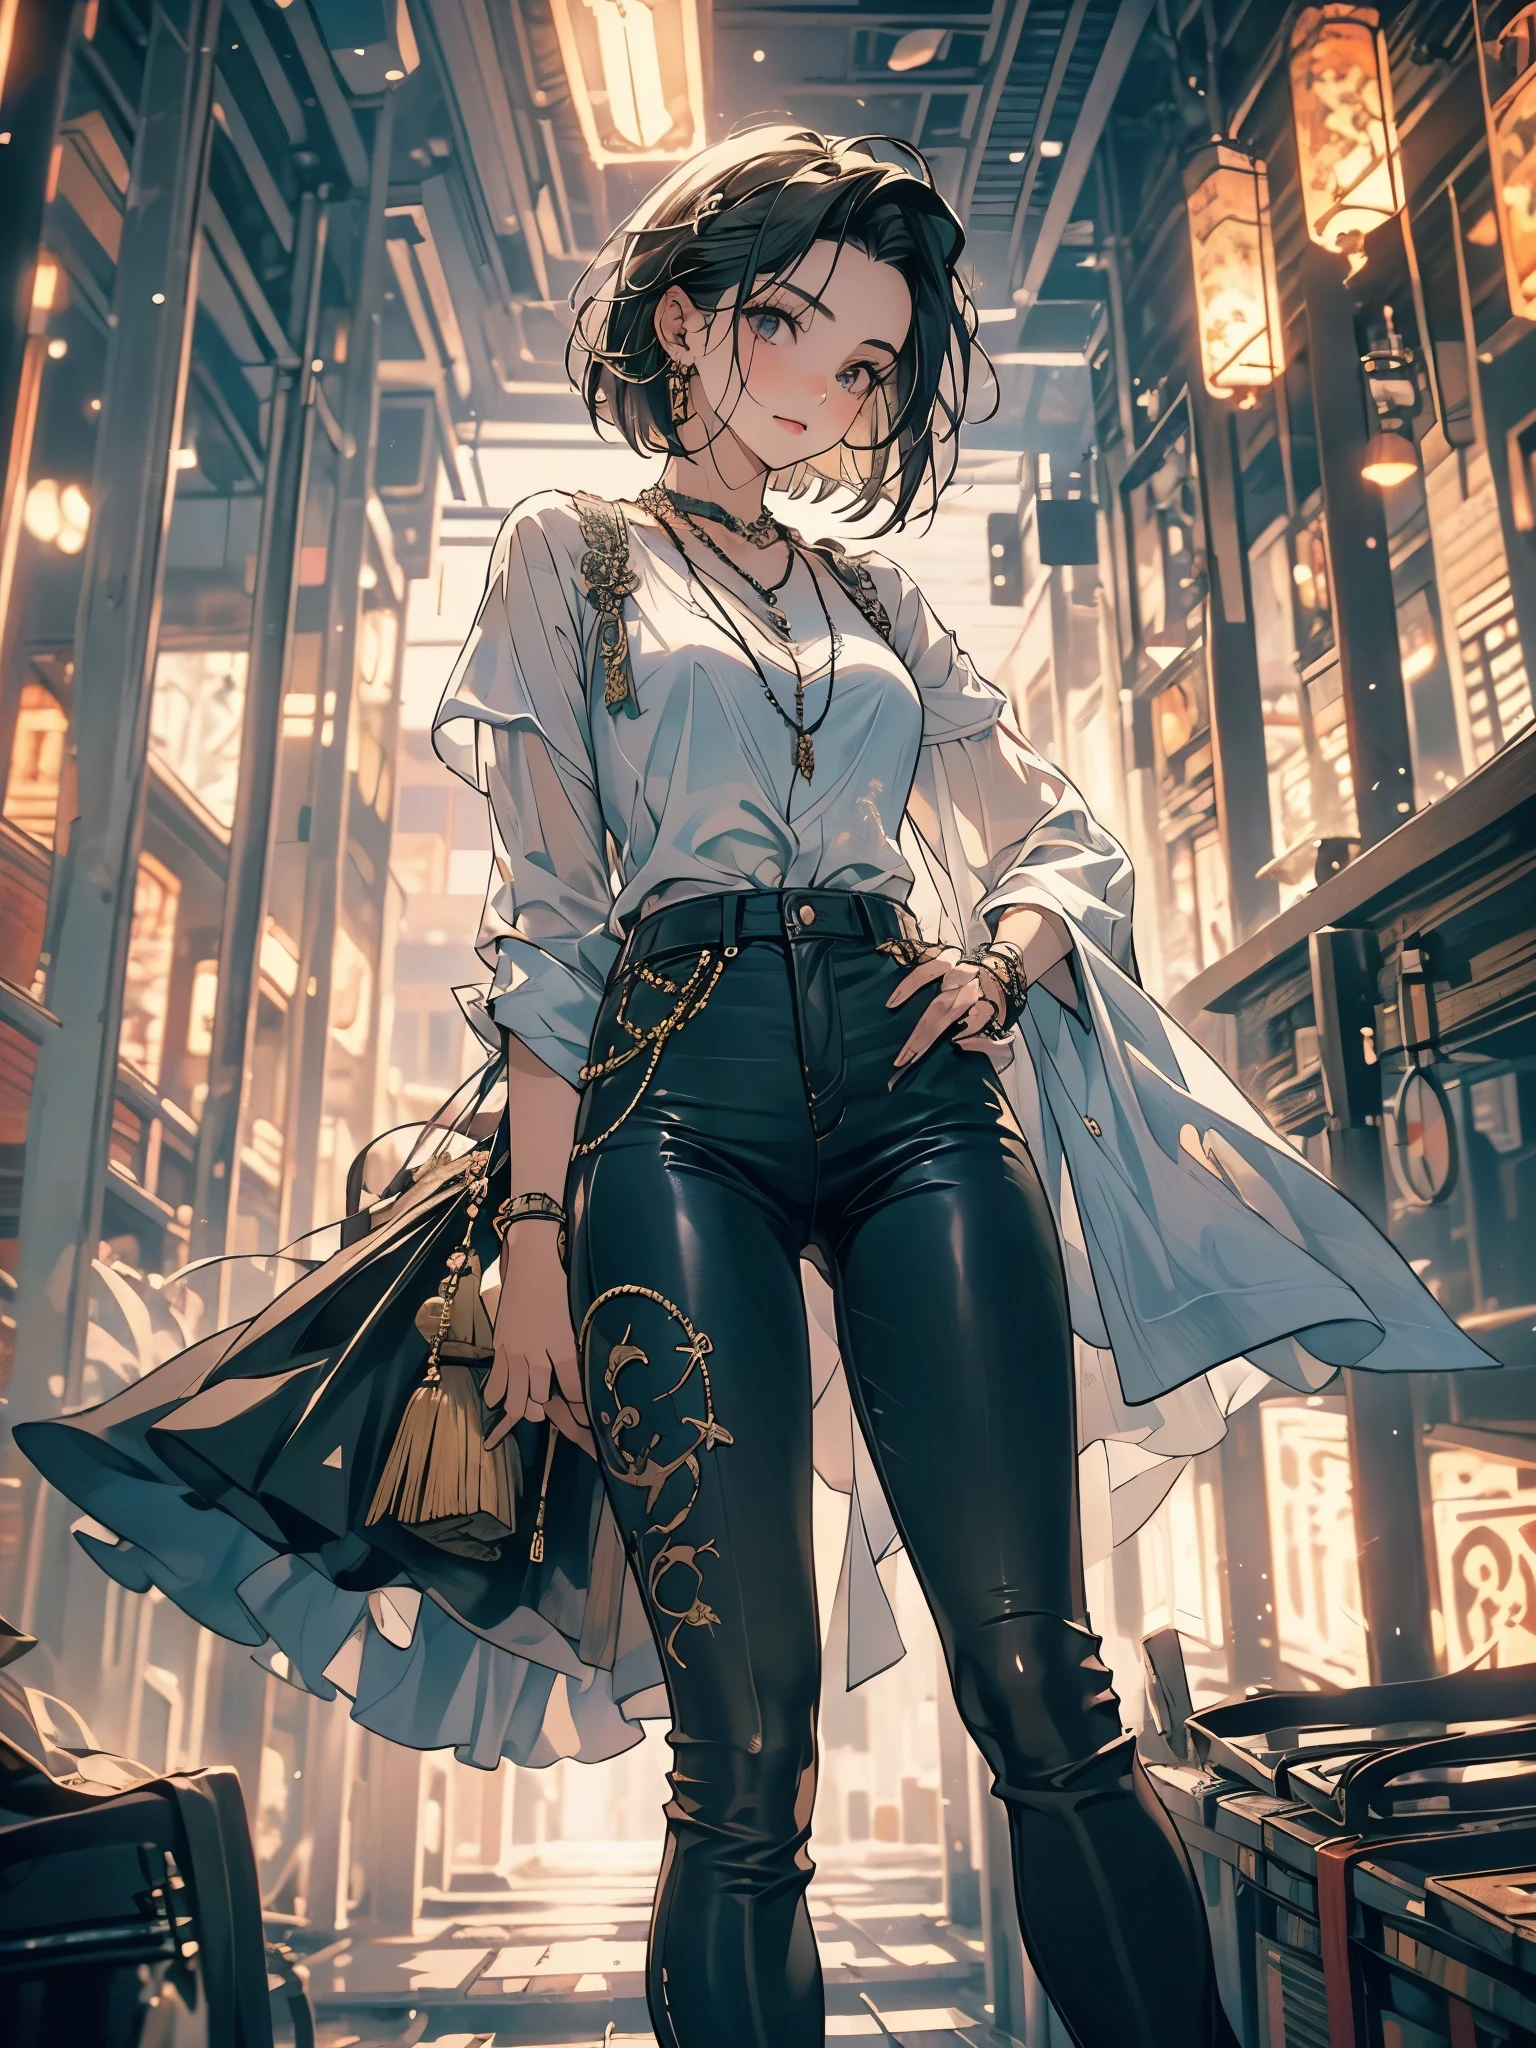 A girl walking through the streets of Italy, (((the girl has white hair, short bob hair, white shirt with neckline, black leg pants, shoulder bag, and the girl walks like a model))), people walk down the street, Socialization, view from below with focus on the character and the sky above